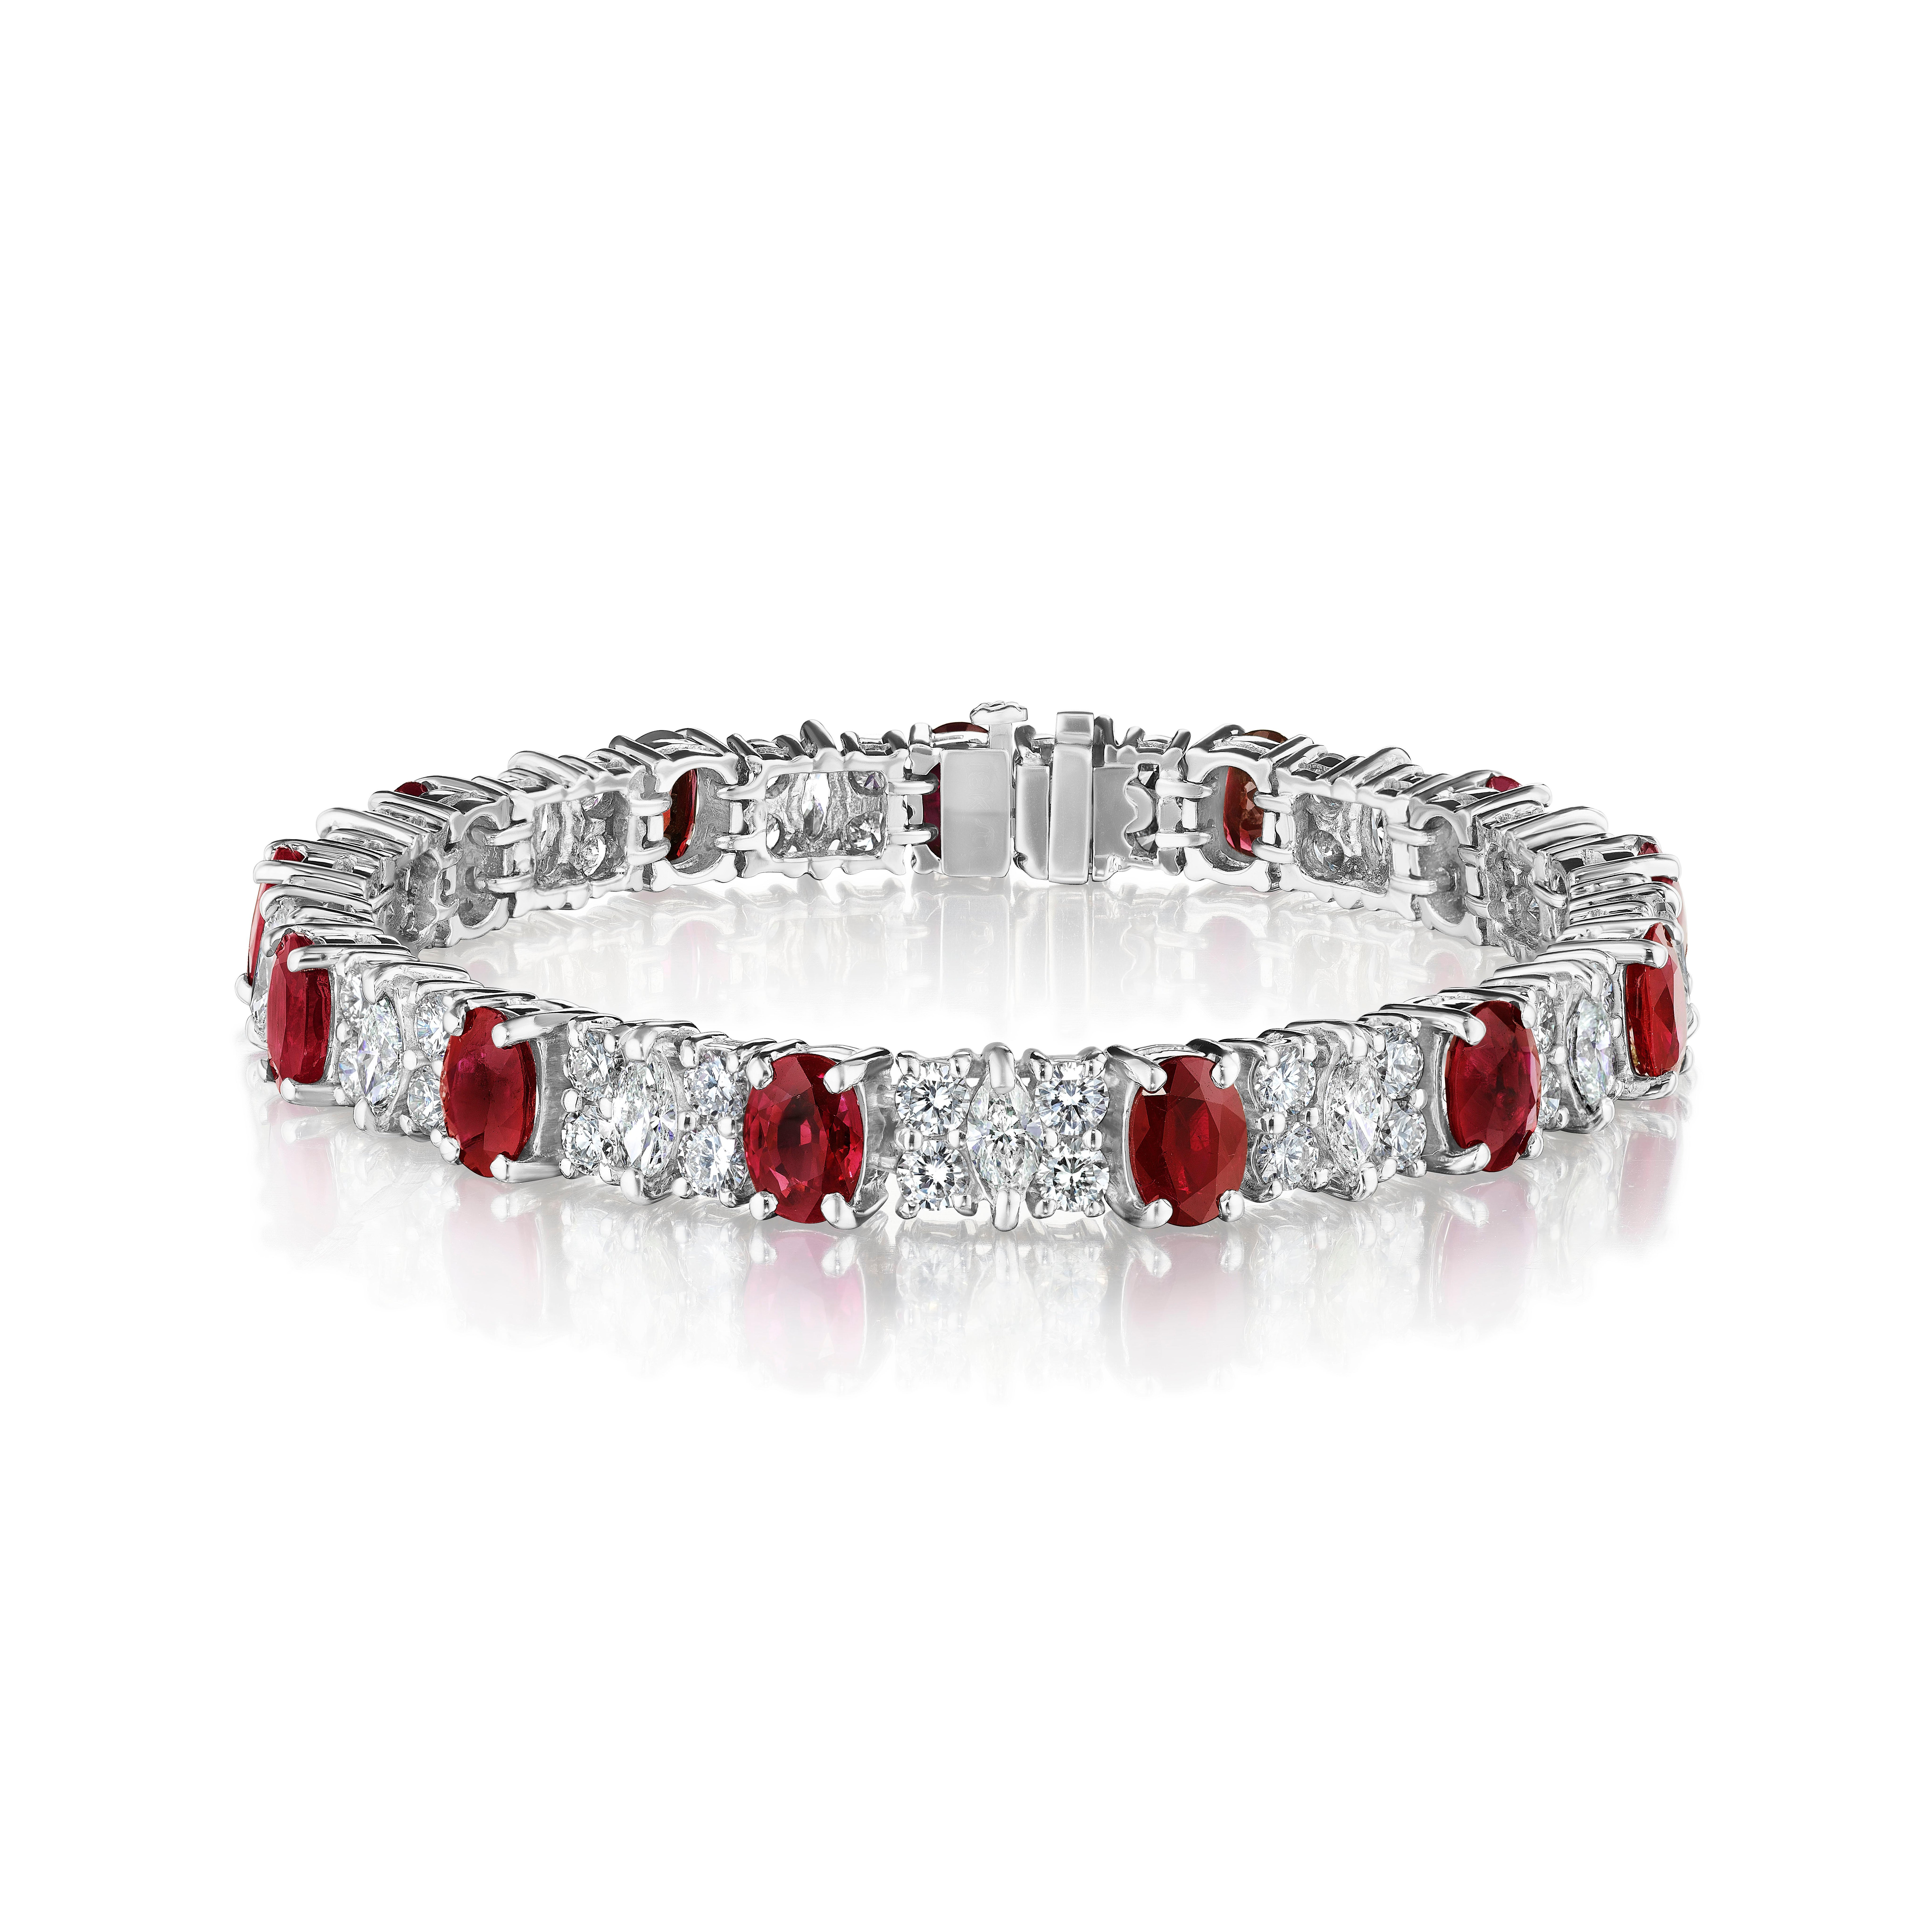 Modern 19.61ct Oval Ruby & Marquise Cut Diamond Bracelet in 18KT White Gold For Sale